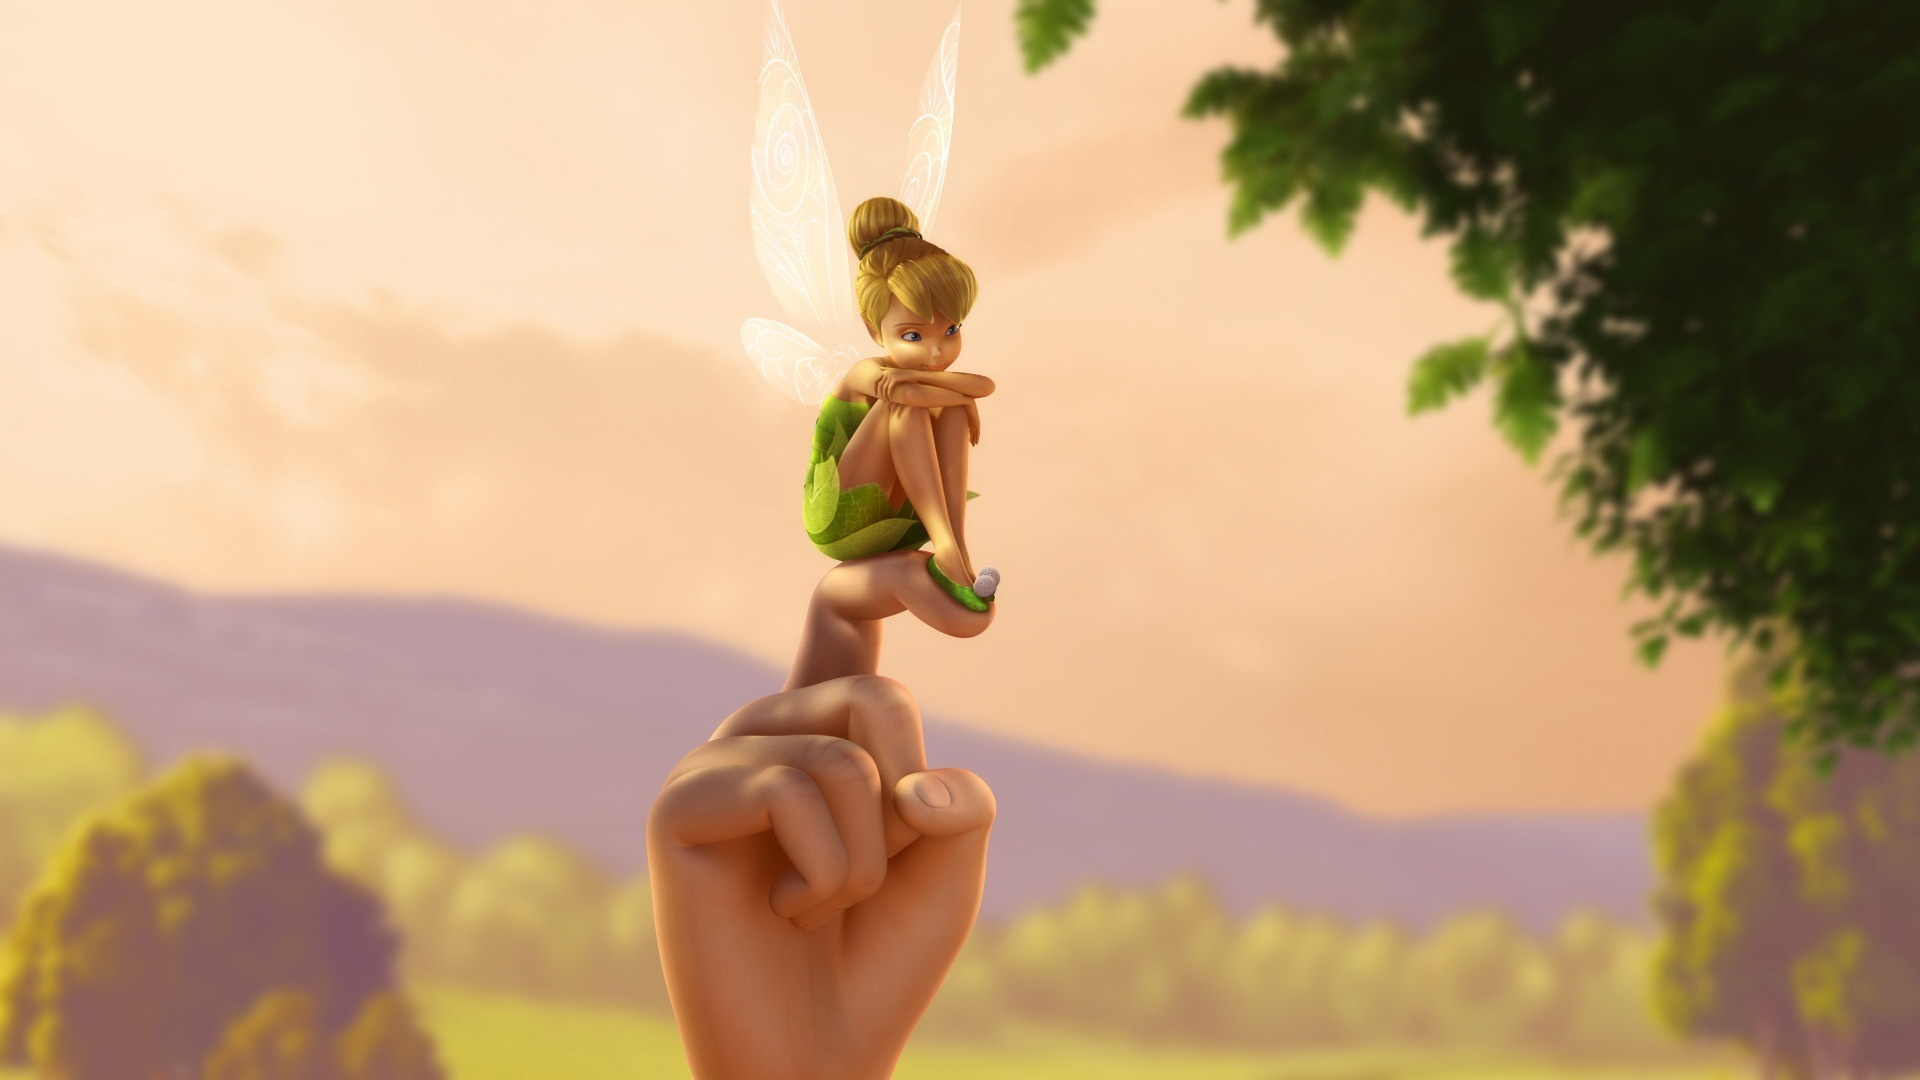 Movie Tinker Bell HD Wallpaper Background Image.